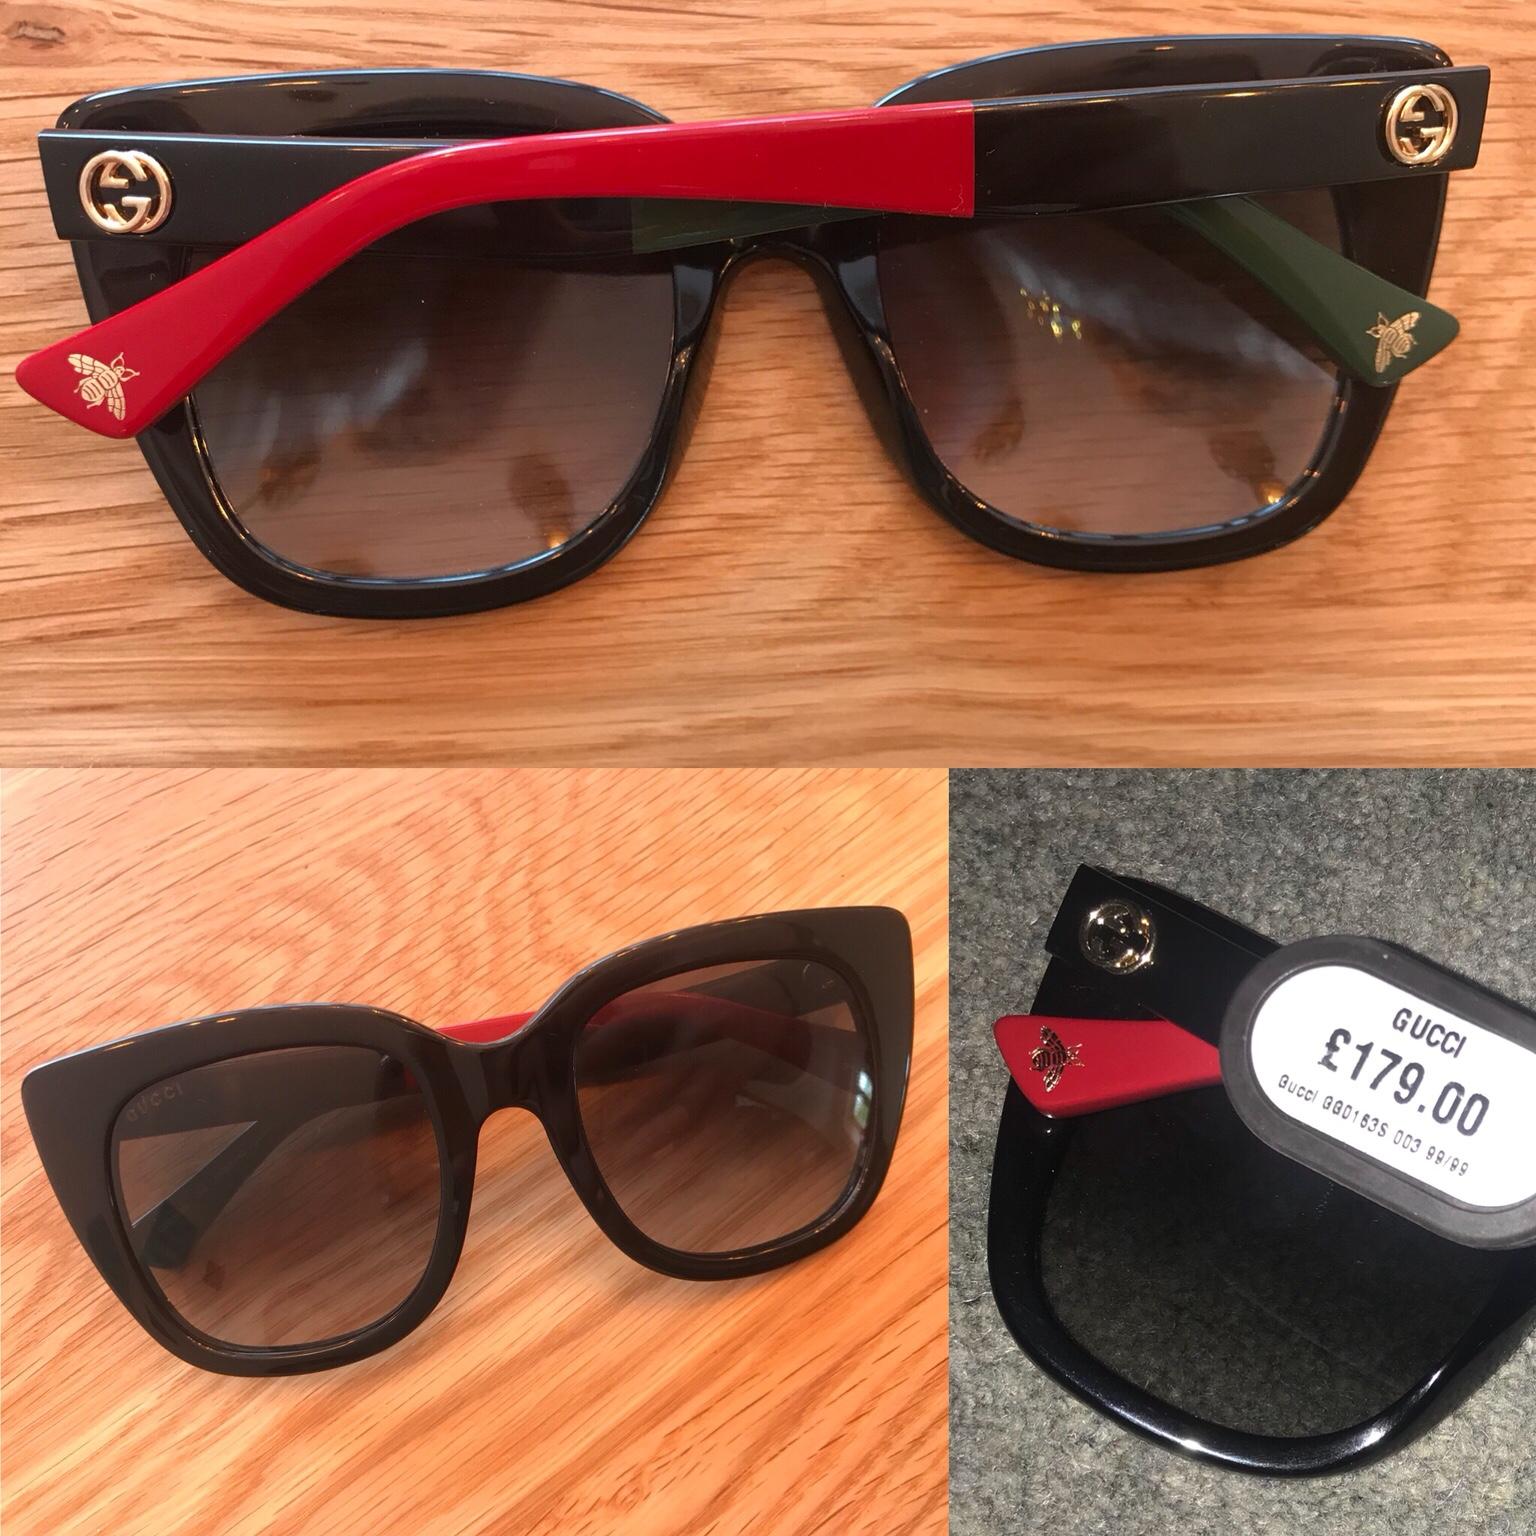 red black and green gucci glasses, OFF 